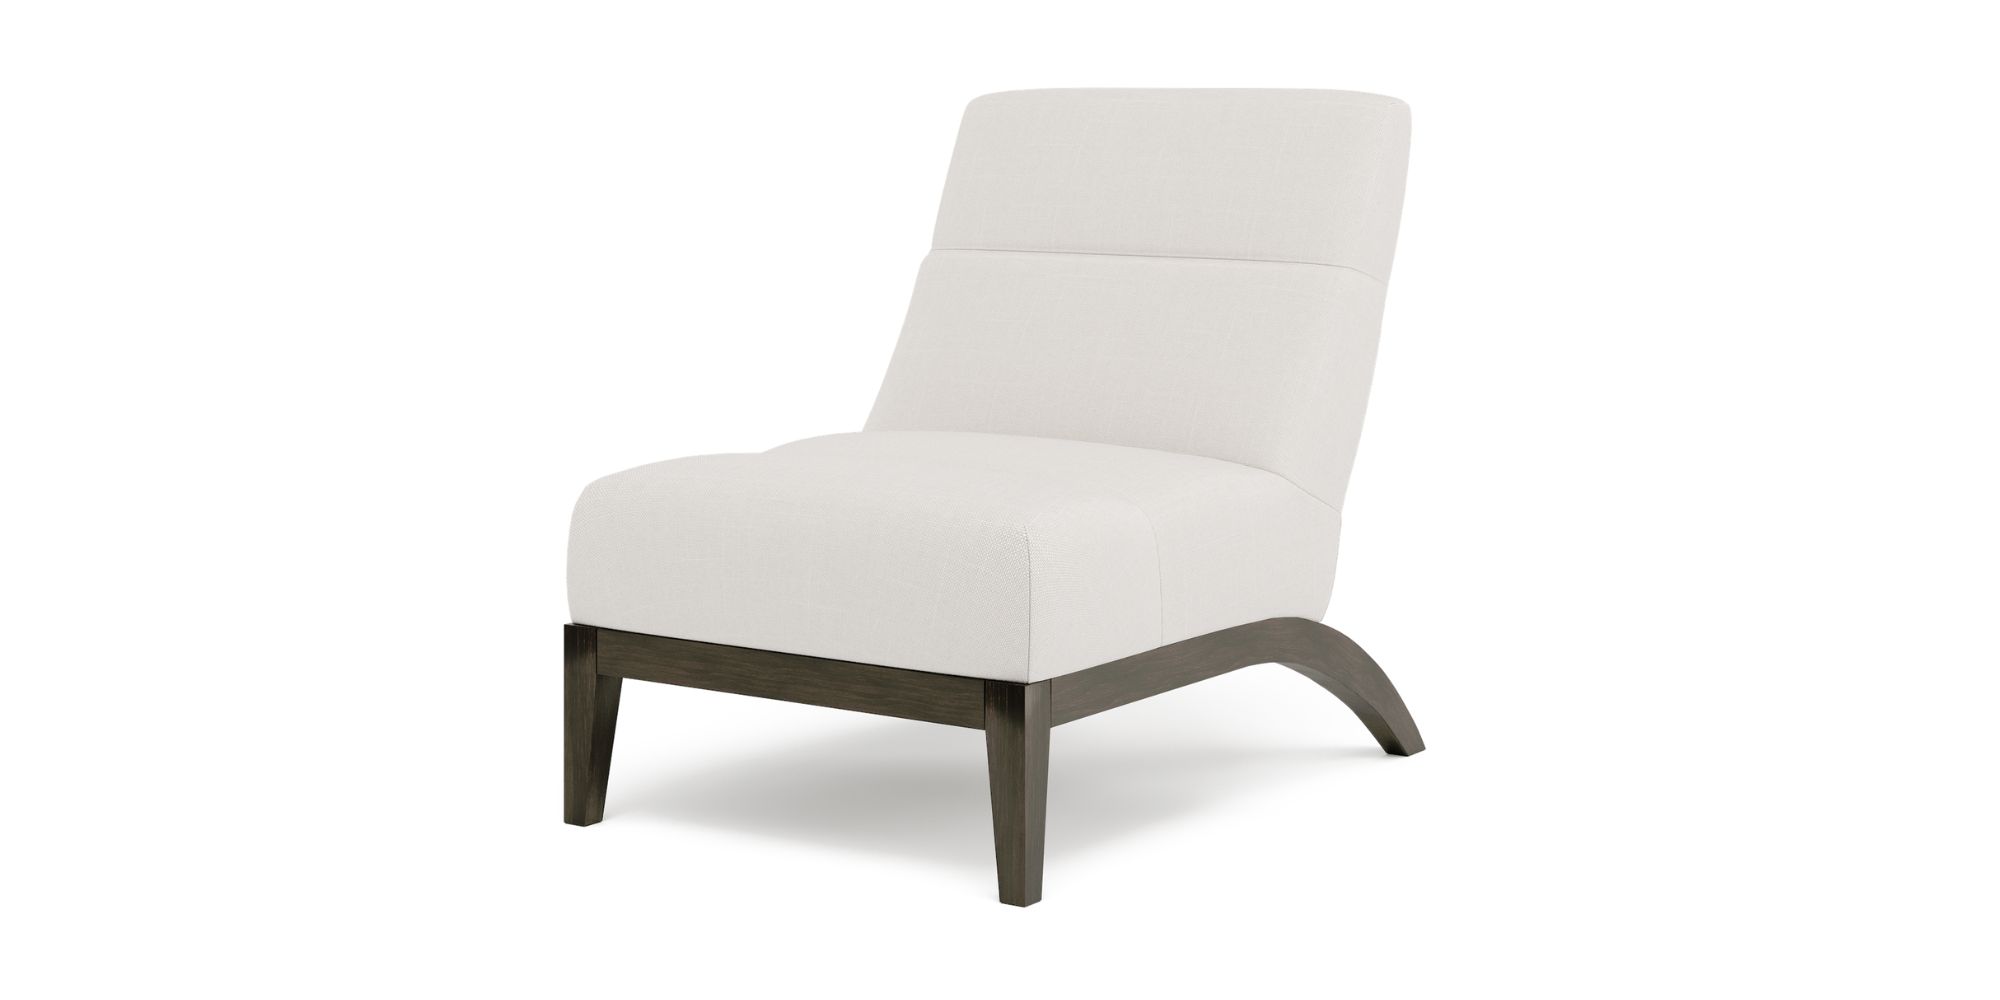 Tamarindo Swivel Armchair in Outdoor Chairs for Tamarindo collection